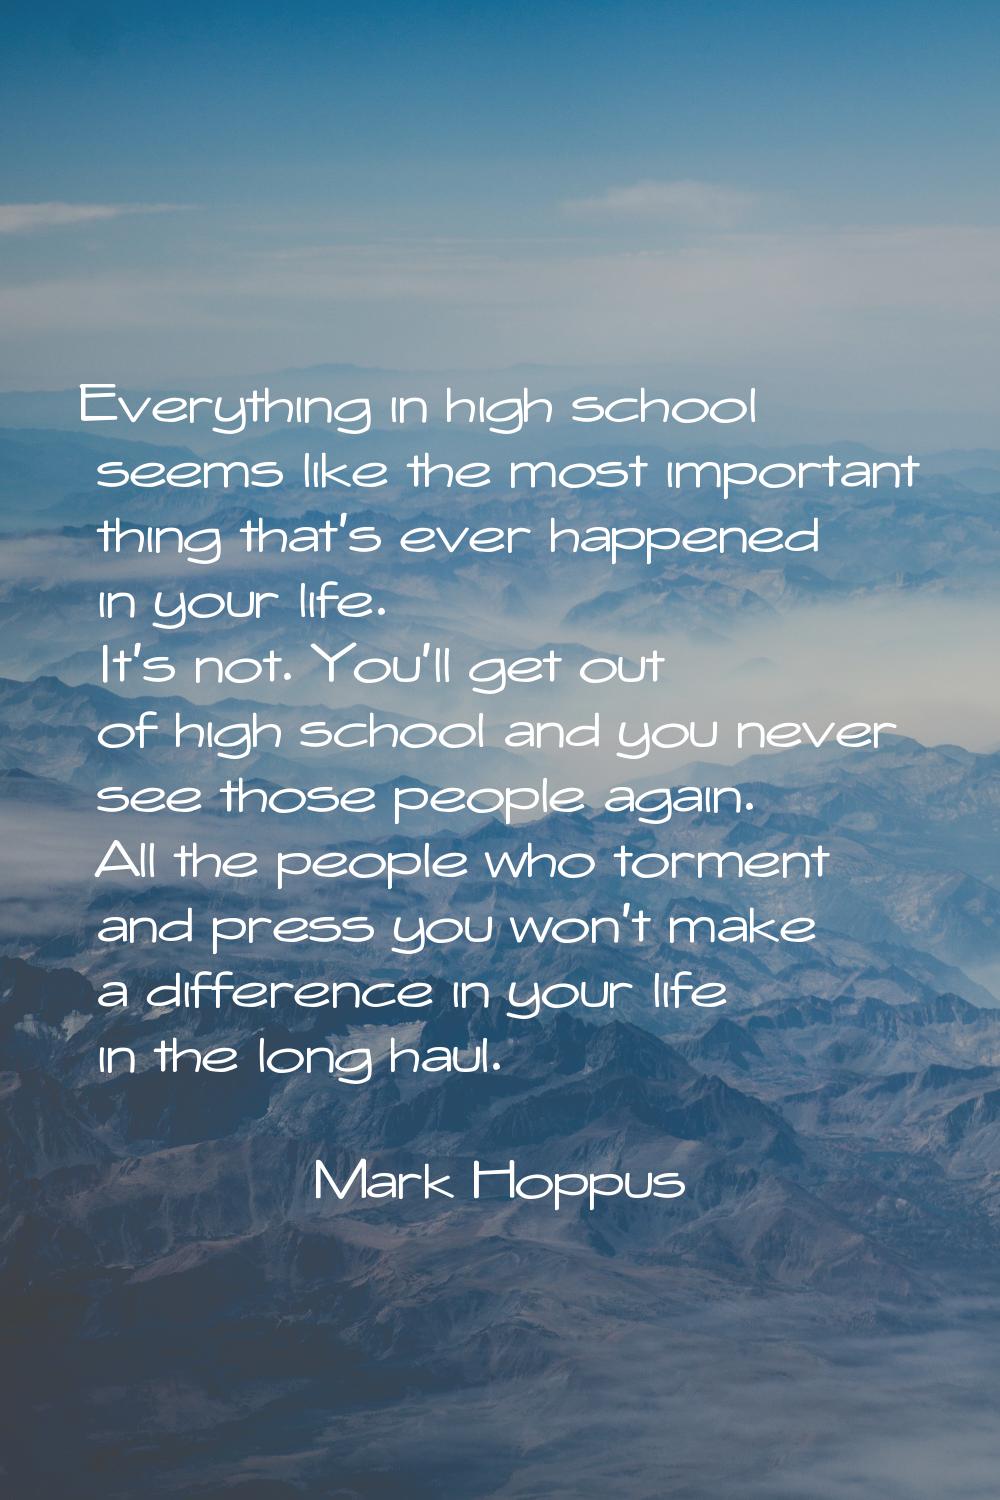 Everything in high school seems like the most important thing that's ever happened in your life. It